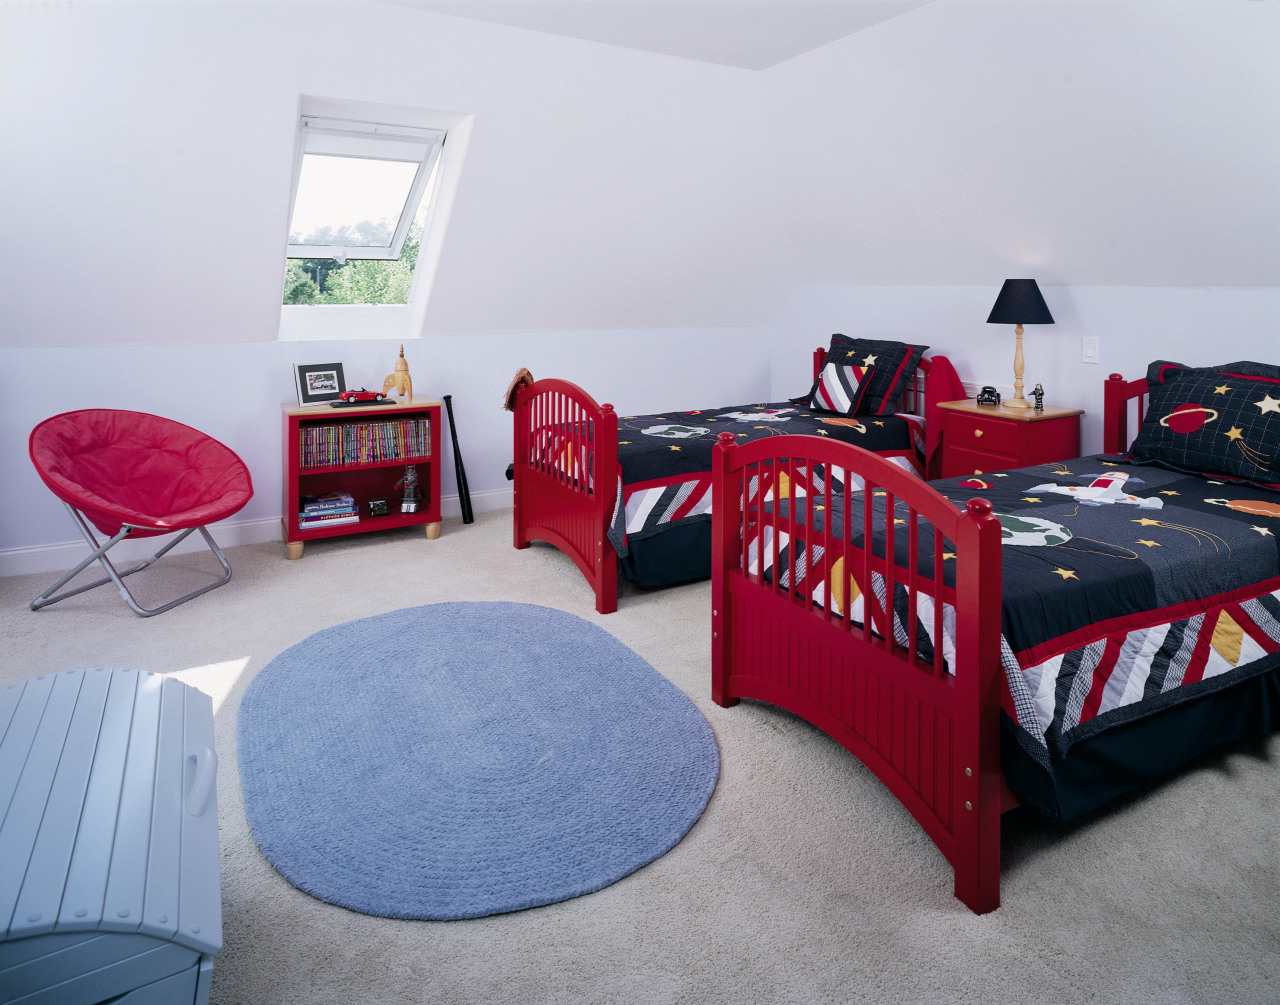 View of this children's bedroom bed, bed frame, bed sheet, bedding, bedroom, furniture, home, interior design, linens, product, real estate, red, room, textile, gray